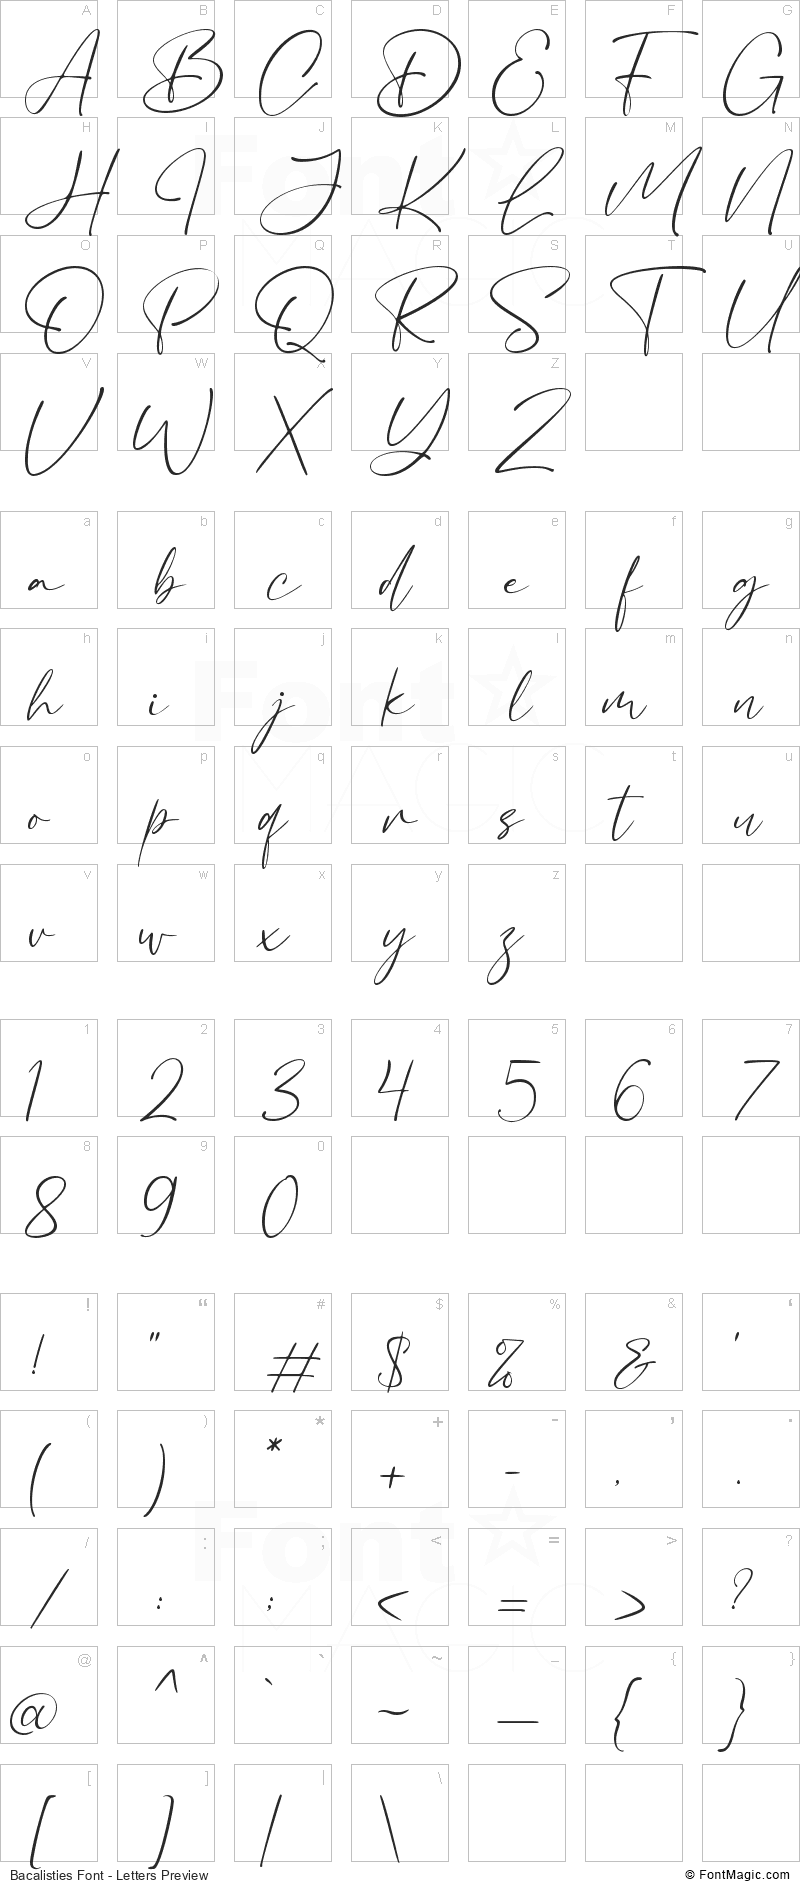 Bacalisties Font - All Latters Preview Chart